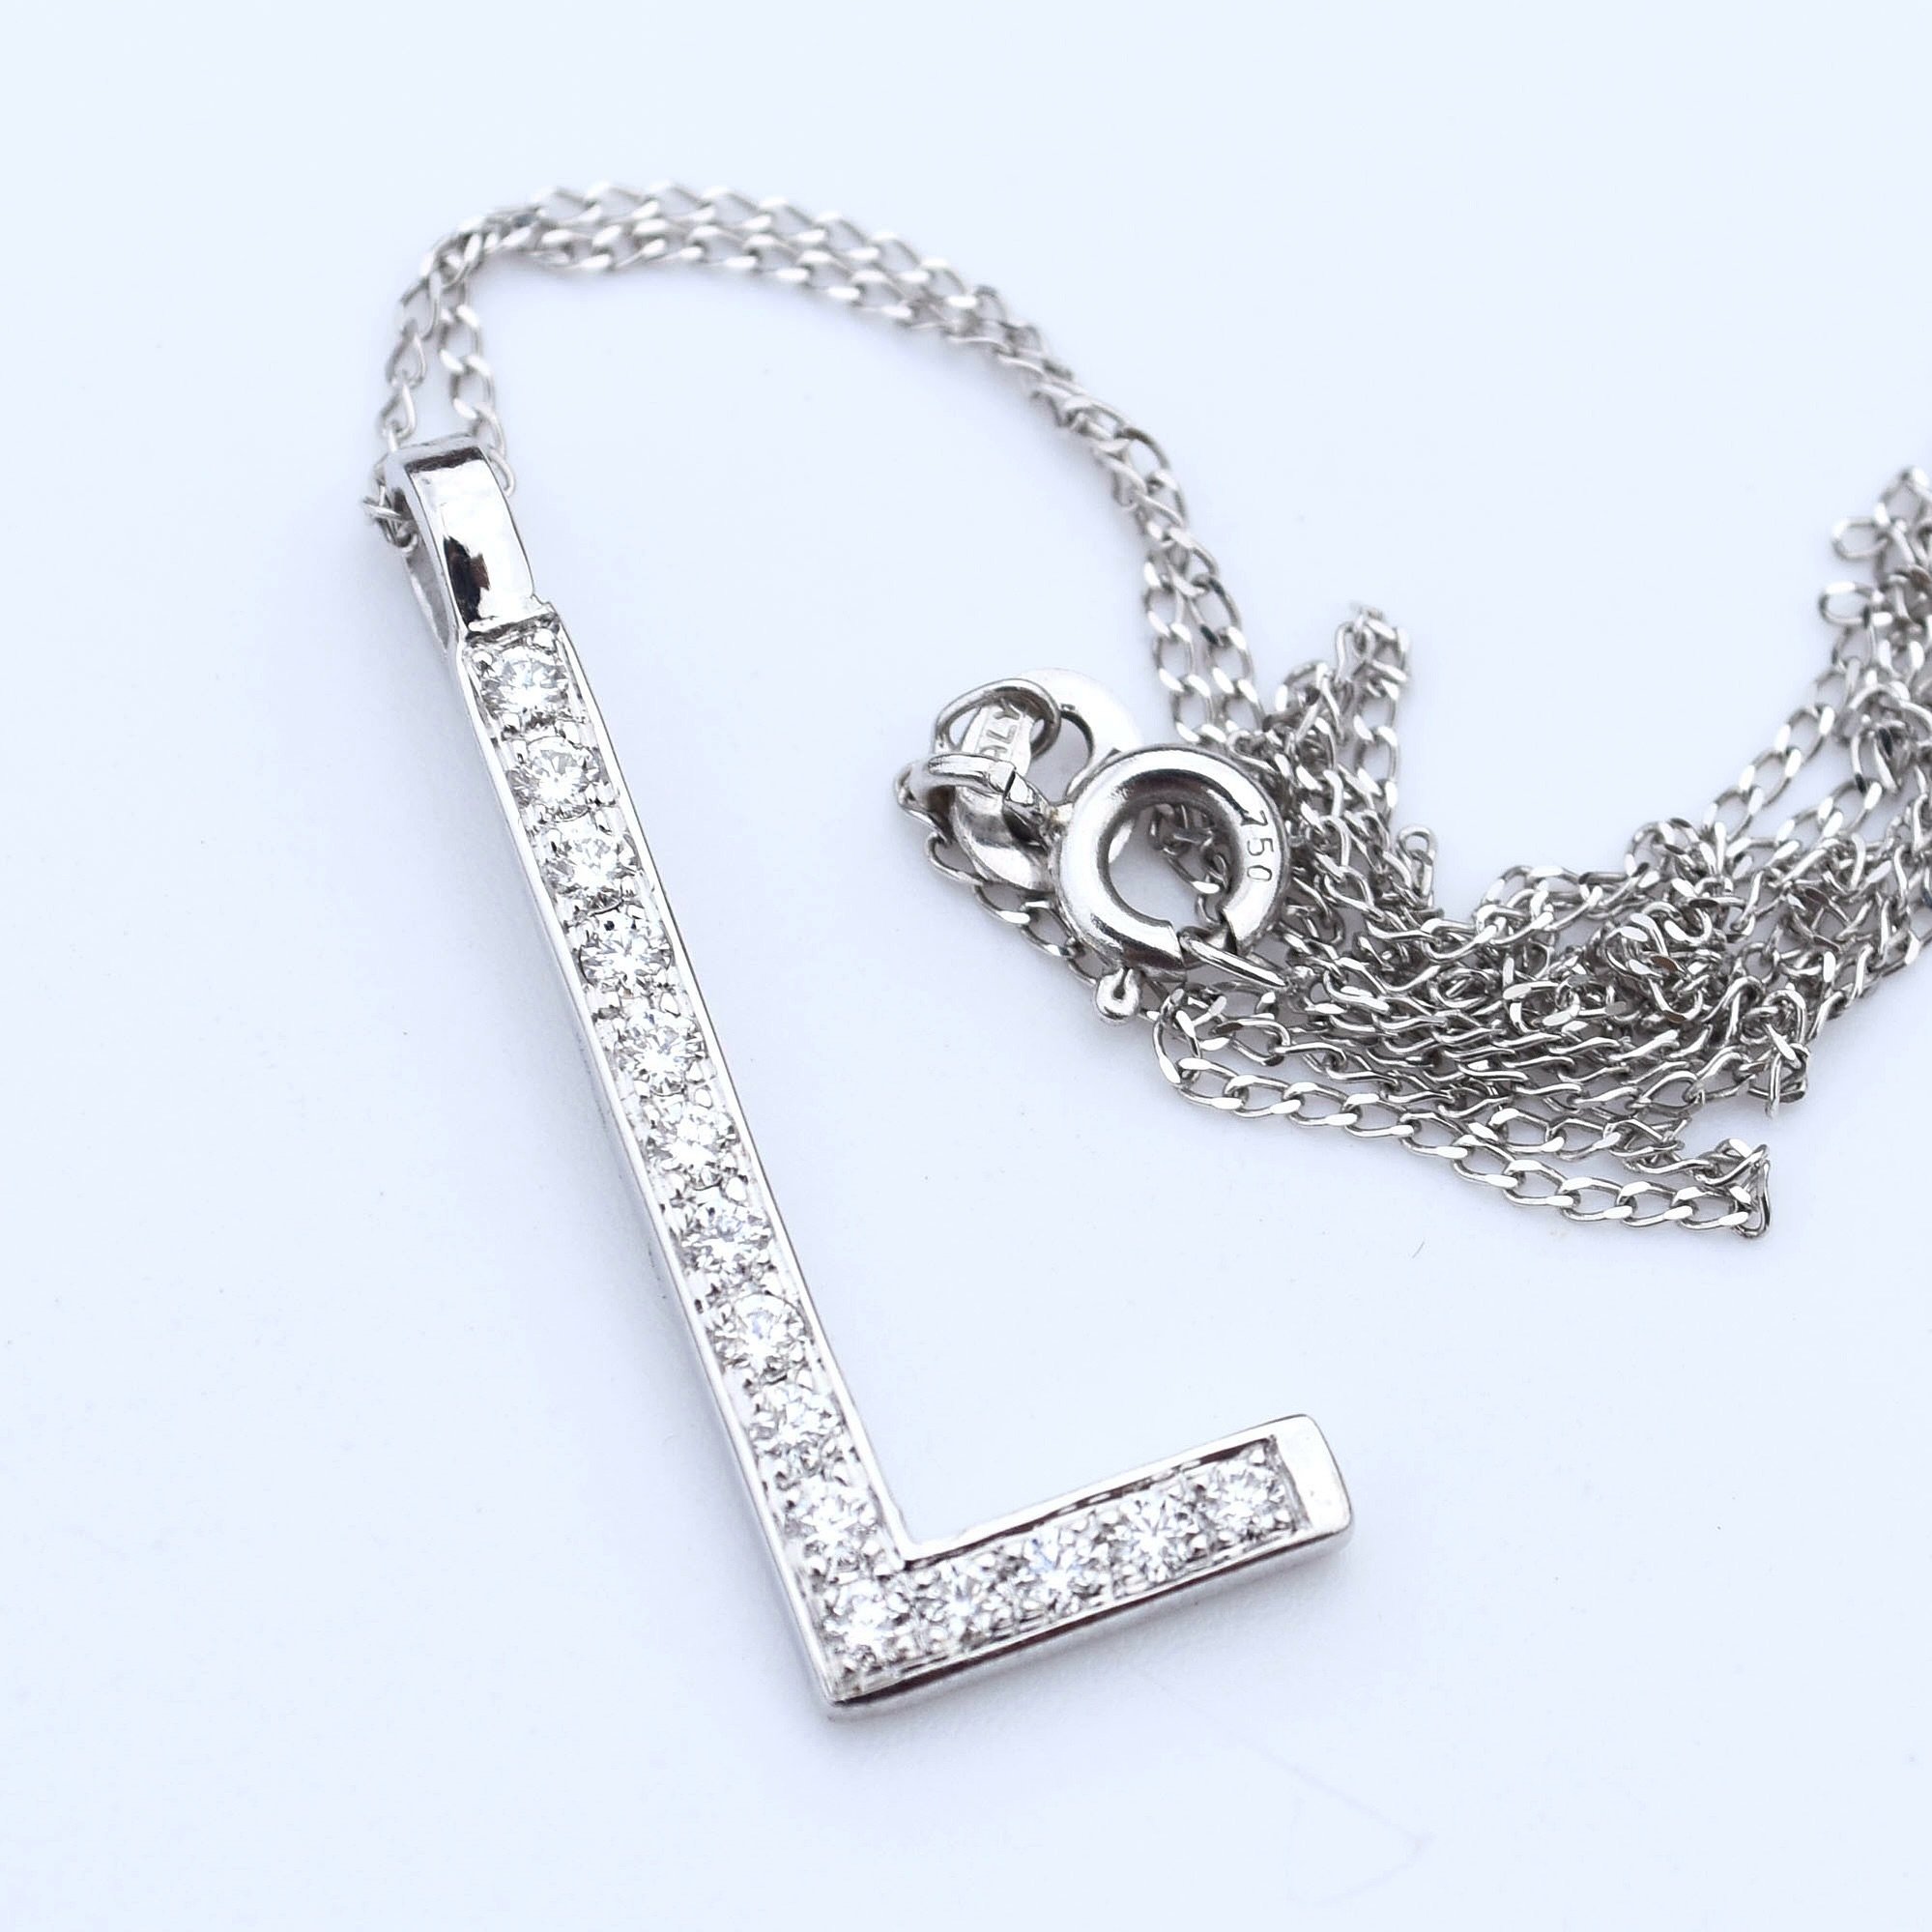 Large Letter Initial Pendant ❣️featuring 0.4 Ct Pave diamond in 18k White Gold

It is a statement and a special piece to treasure and to receive as a birthday 💓gift

All letter pendants can be customised in any precious metal(18k Yellow, white, rose